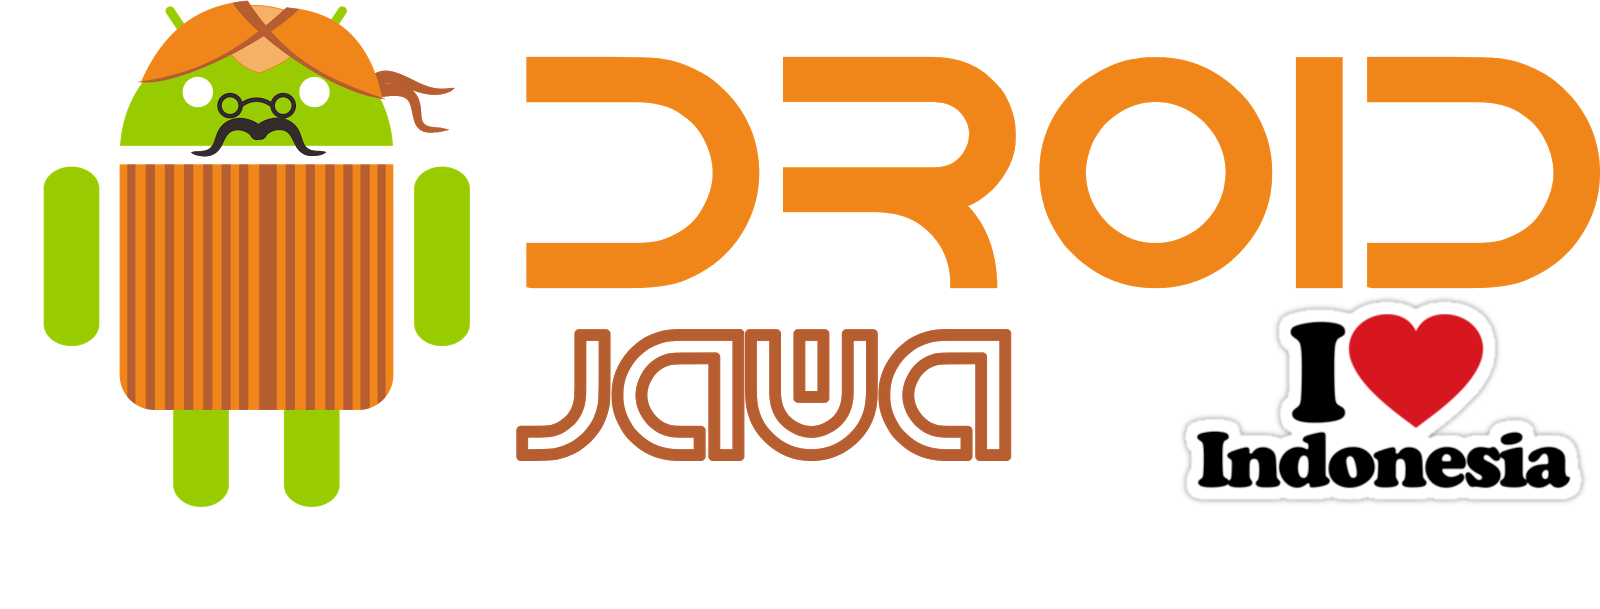 DROID JOWO | Sumber Tutorial Android